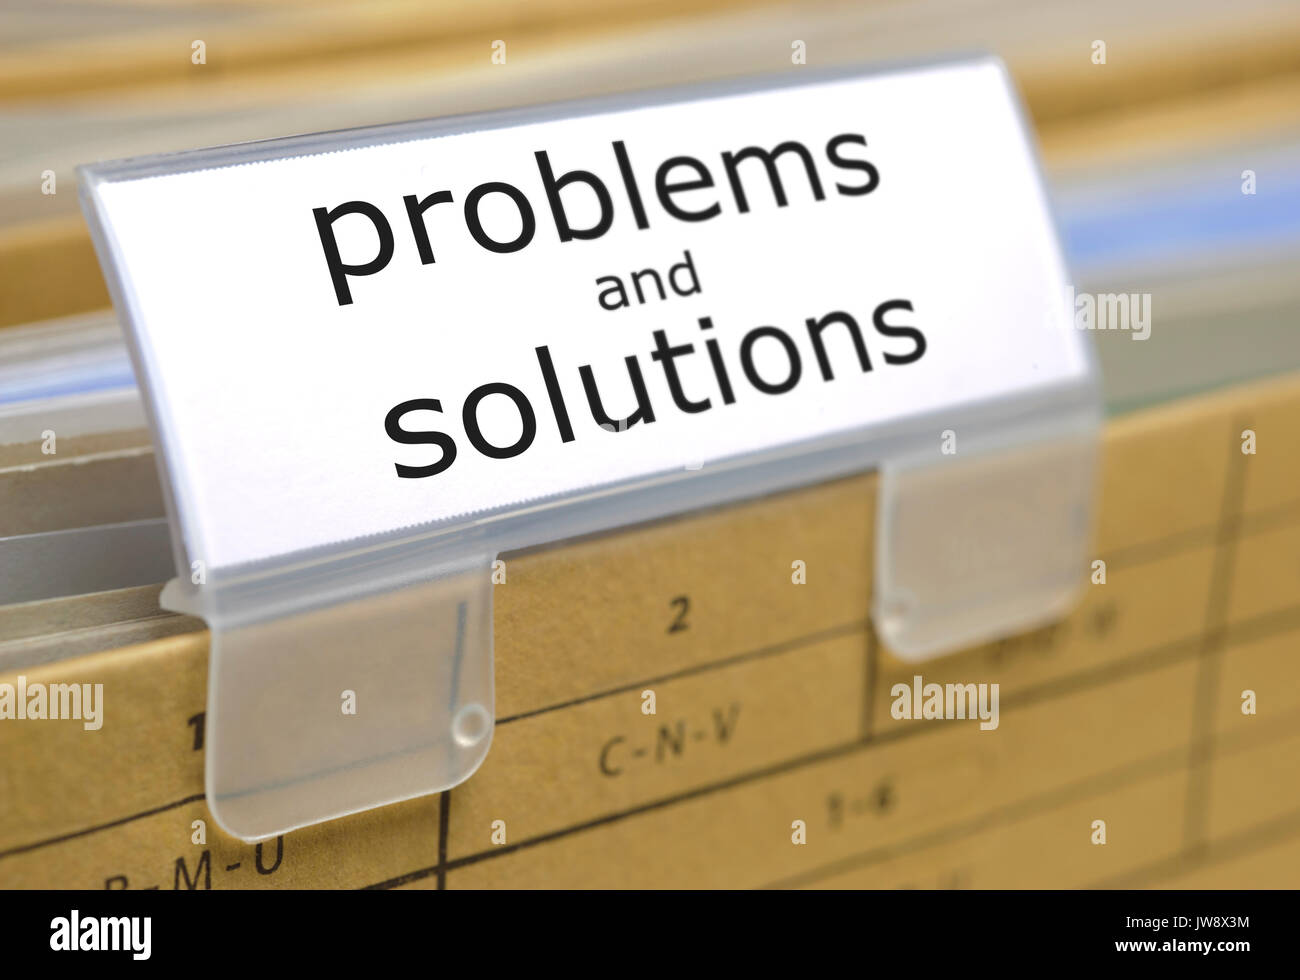 file folder in office for problems and solutions Stock Photo